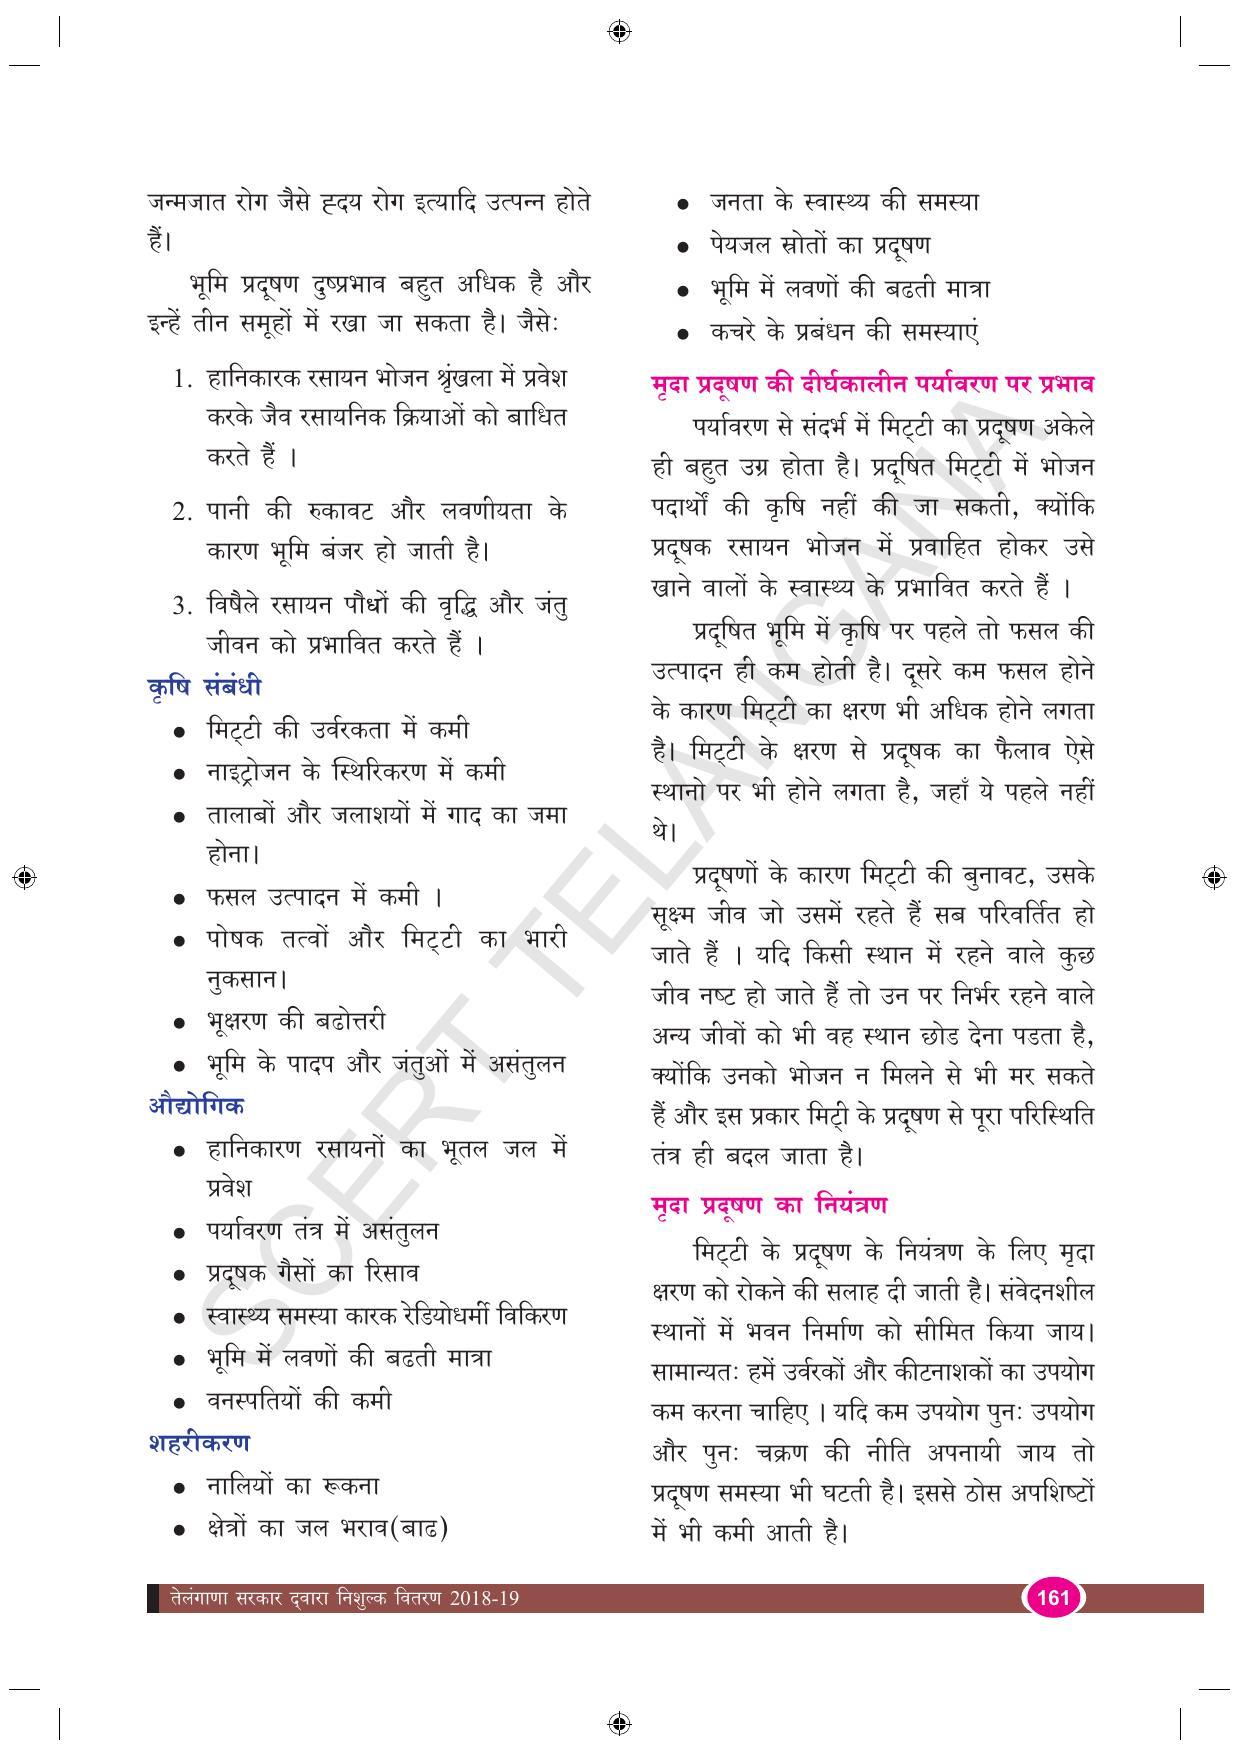 TS SCERT Class 9 Biological Science (Hindi Medium) Text Book - Page 173